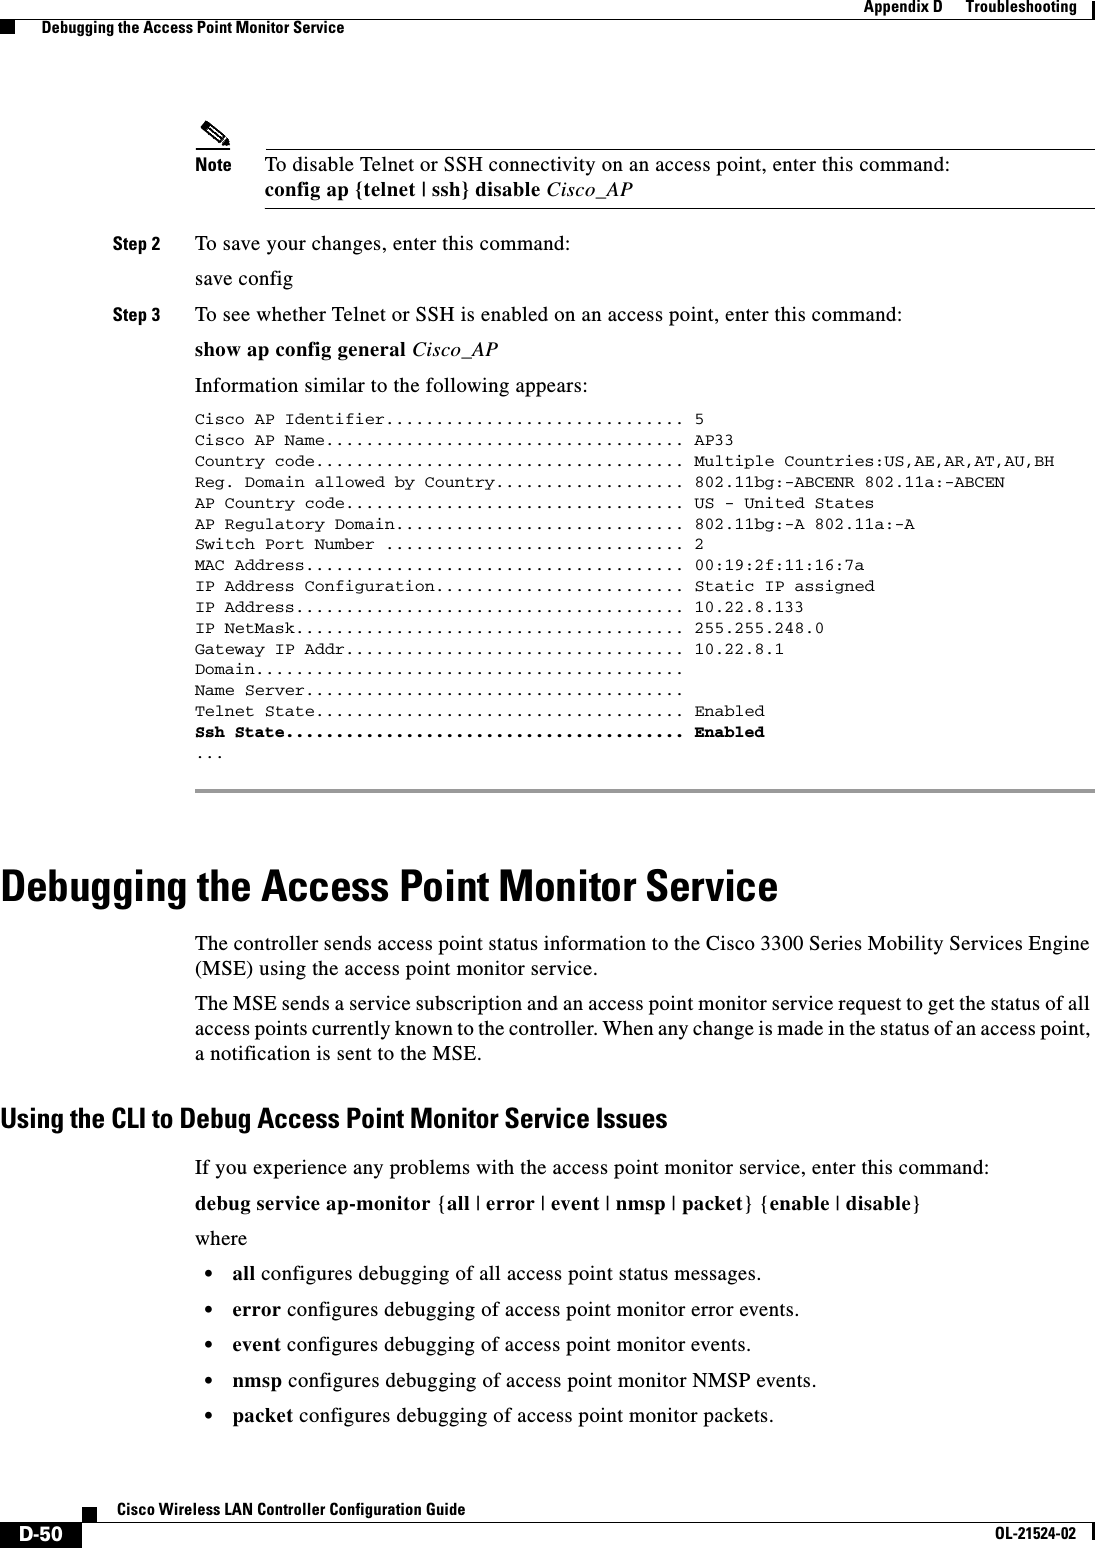  D-50Cisco Wireless LAN Controller Configuration GuideOL-21524-02Appendix D      Troubleshooting  Debugging the Access Point Monitor ServiceNote To disable Telnet or SSH connectivity on an access point, enter this command: config ap {telnet | ssh} disable Cisco_APStep 2 To save your changes, enter this command:save configStep 3 To see whether Telnet or SSH is enabled on an access point, enter this command:show ap config general Cisco_APInformation similar to the following appears:Cisco AP Identifier.............................. 5Cisco AP Name.................................... AP33Country code..................................... Multiple Countries:US,AE,AR,AT,AU,BHReg. Domain allowed by Country................... 802.11bg:-ABCENR 802.11a:-ABCENAP Country code.................................. US - United StatesAP Regulatory Domain............................. 802.11bg:-A 802.11a:-A Switch Port Number .............................. 2MAC Address...................................... 00:19:2f:11:16:7aIP Address Configuration......................... Static IP assignedIP Address....................................... 10.22.8.133IP NetMask....................................... 255.255.248.0Gateway IP Addr.................................. 10.22.8.1Domain........................................... Name Server...................................... Telnet State..................................... EnabledSsh State........................................ Enabled... Debugging the Access Point Monitor ServiceThe controller sends access point status information to the Cisco 3300 Series Mobility Services Engine (MSE) using the access point monitor service.The MSE sends a service subscription and an access point monitor service request to get the status of all access points currently known to the controller. When any change is made in the status of an access point, a notification is sent to the MSE.Using the CLI to Debug Access Point Monitor Service IssuesIf you experience any problems with the access point monitor service, enter this command:debug service ap-monitor {all | error | event | nmsp | packet} {enable | disable}where  • all configures debugging of all access point status messages.  • error configures debugging of access point monitor error events.  • event configures debugging of access point monitor events.  • nmsp configures debugging of access point monitor NMSP events.  • packet configures debugging of access point monitor packets.